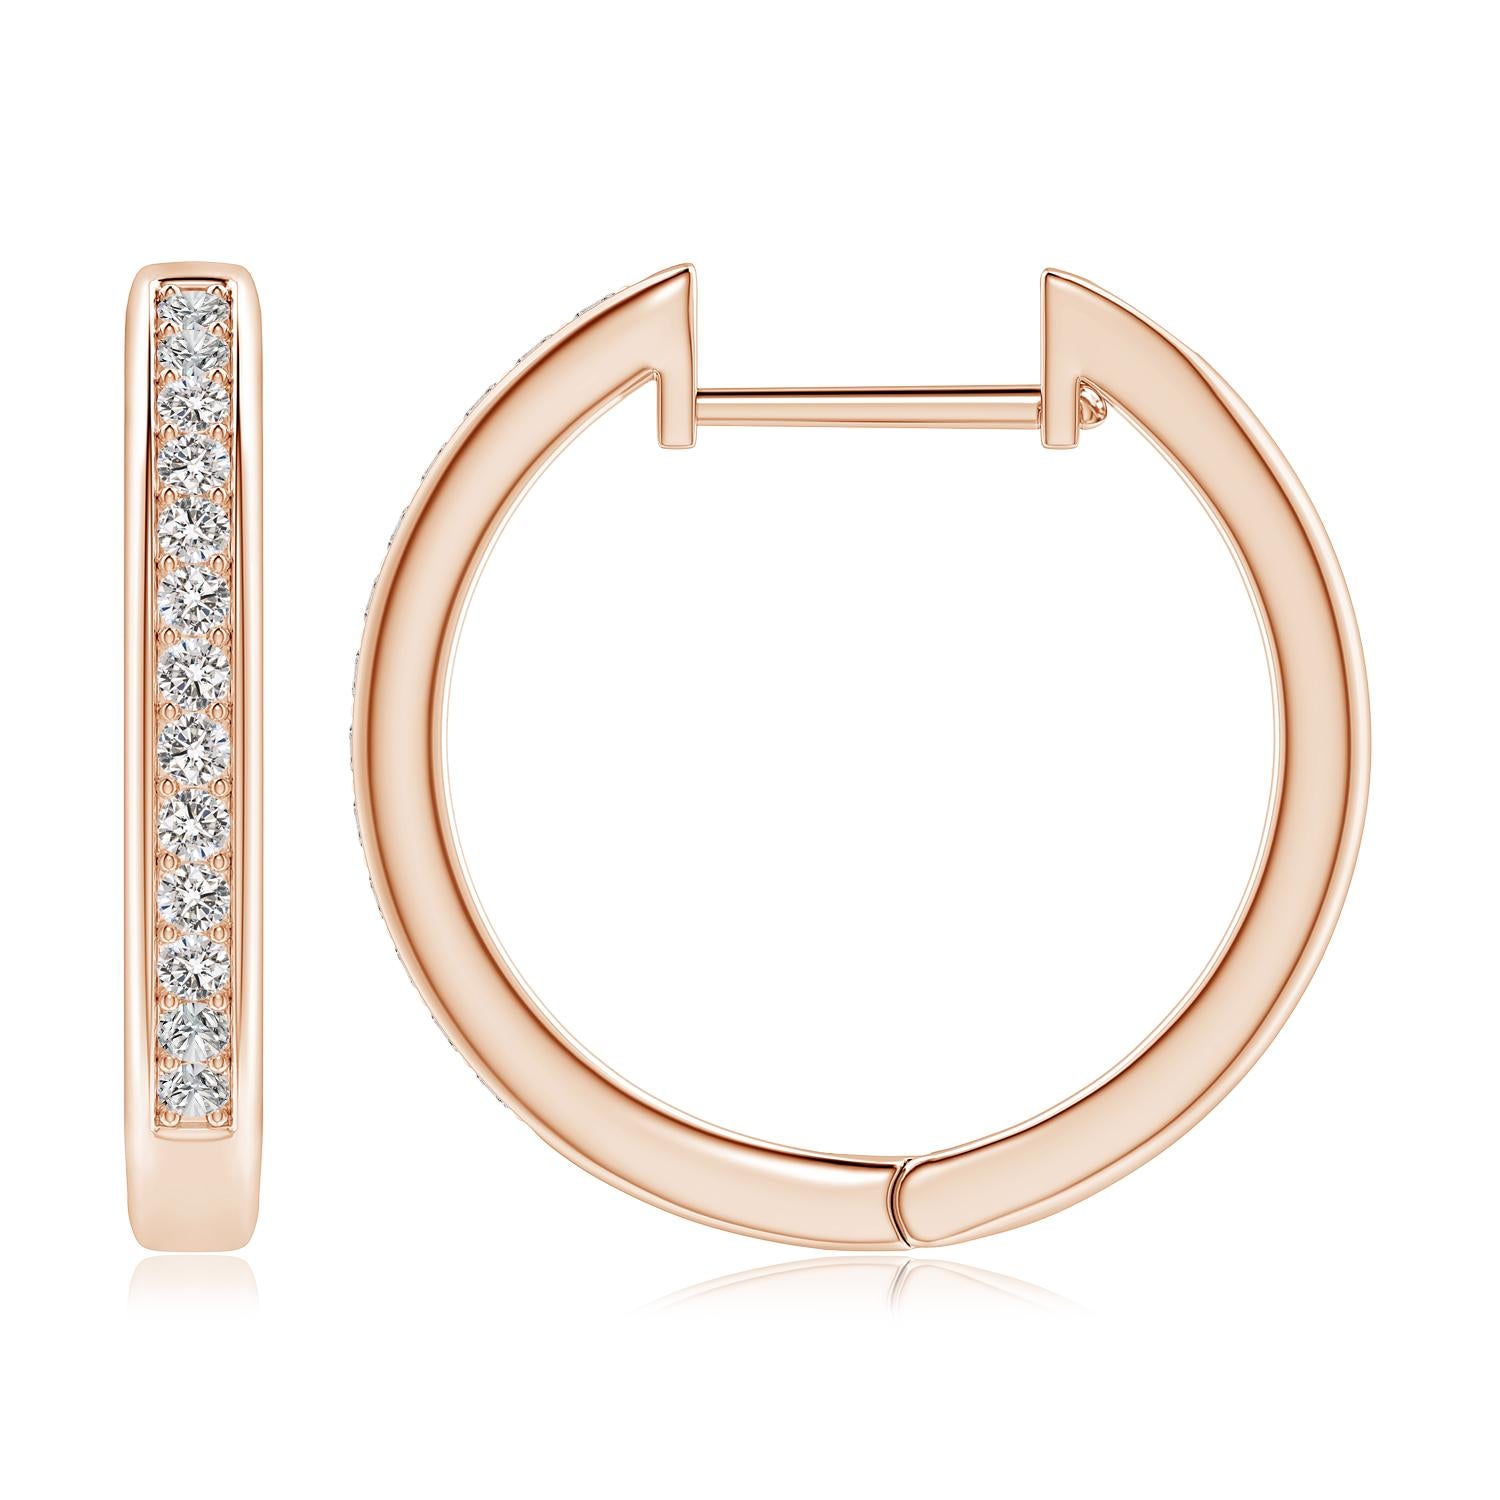 Round Cut Natural Diamond Hoop Earrings in 14K Rose Gold (0.5cttw Color-I-J Clarity-I1-I2) For Sale